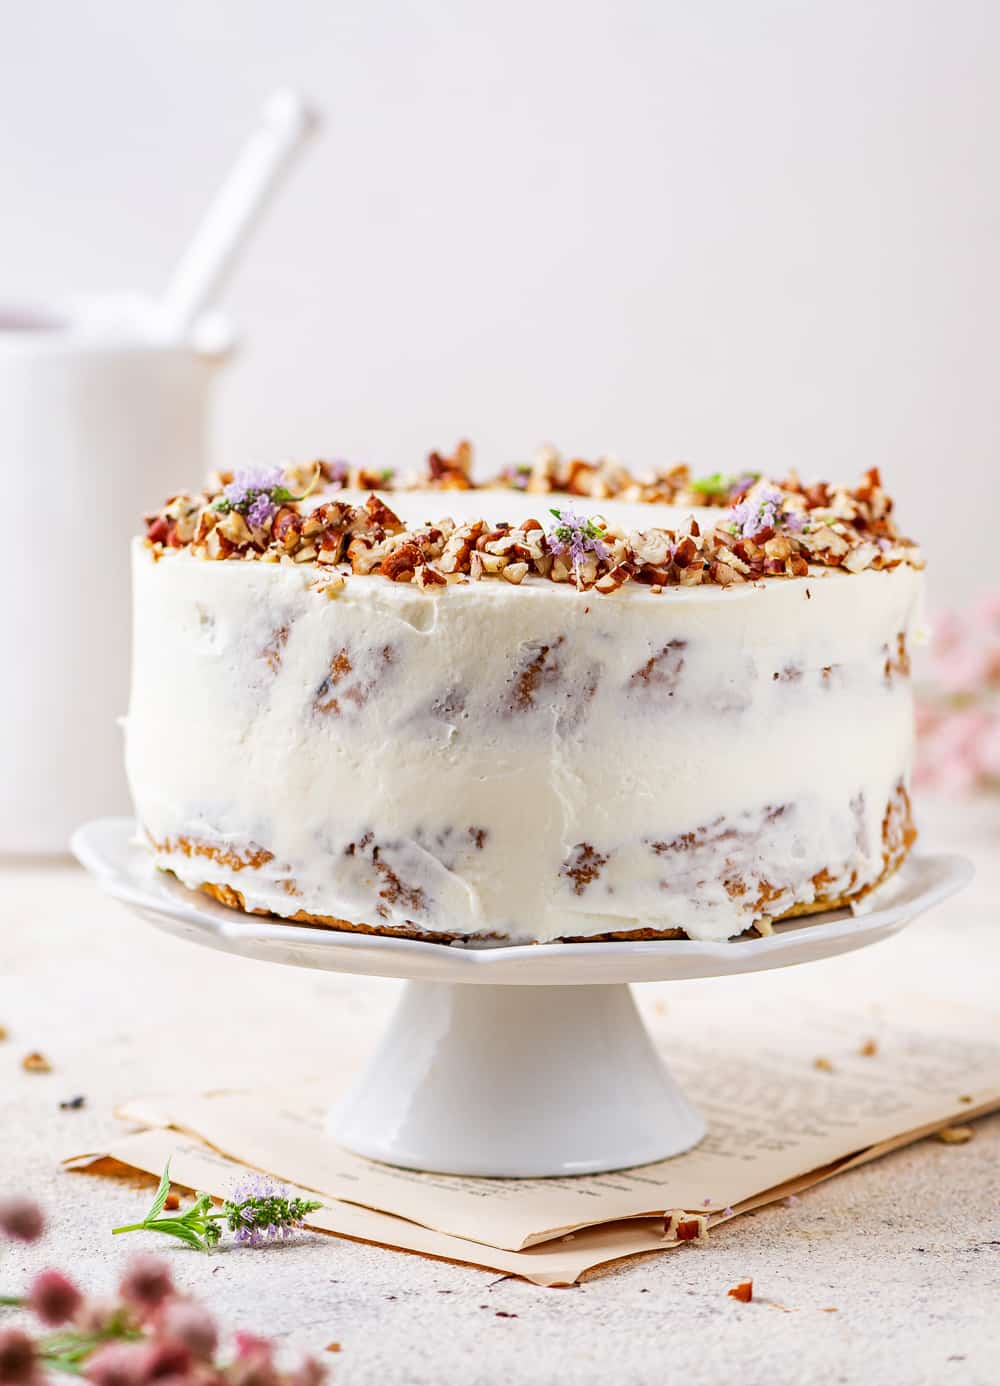 Carrot Cake topped with pecans on a white serving tray.